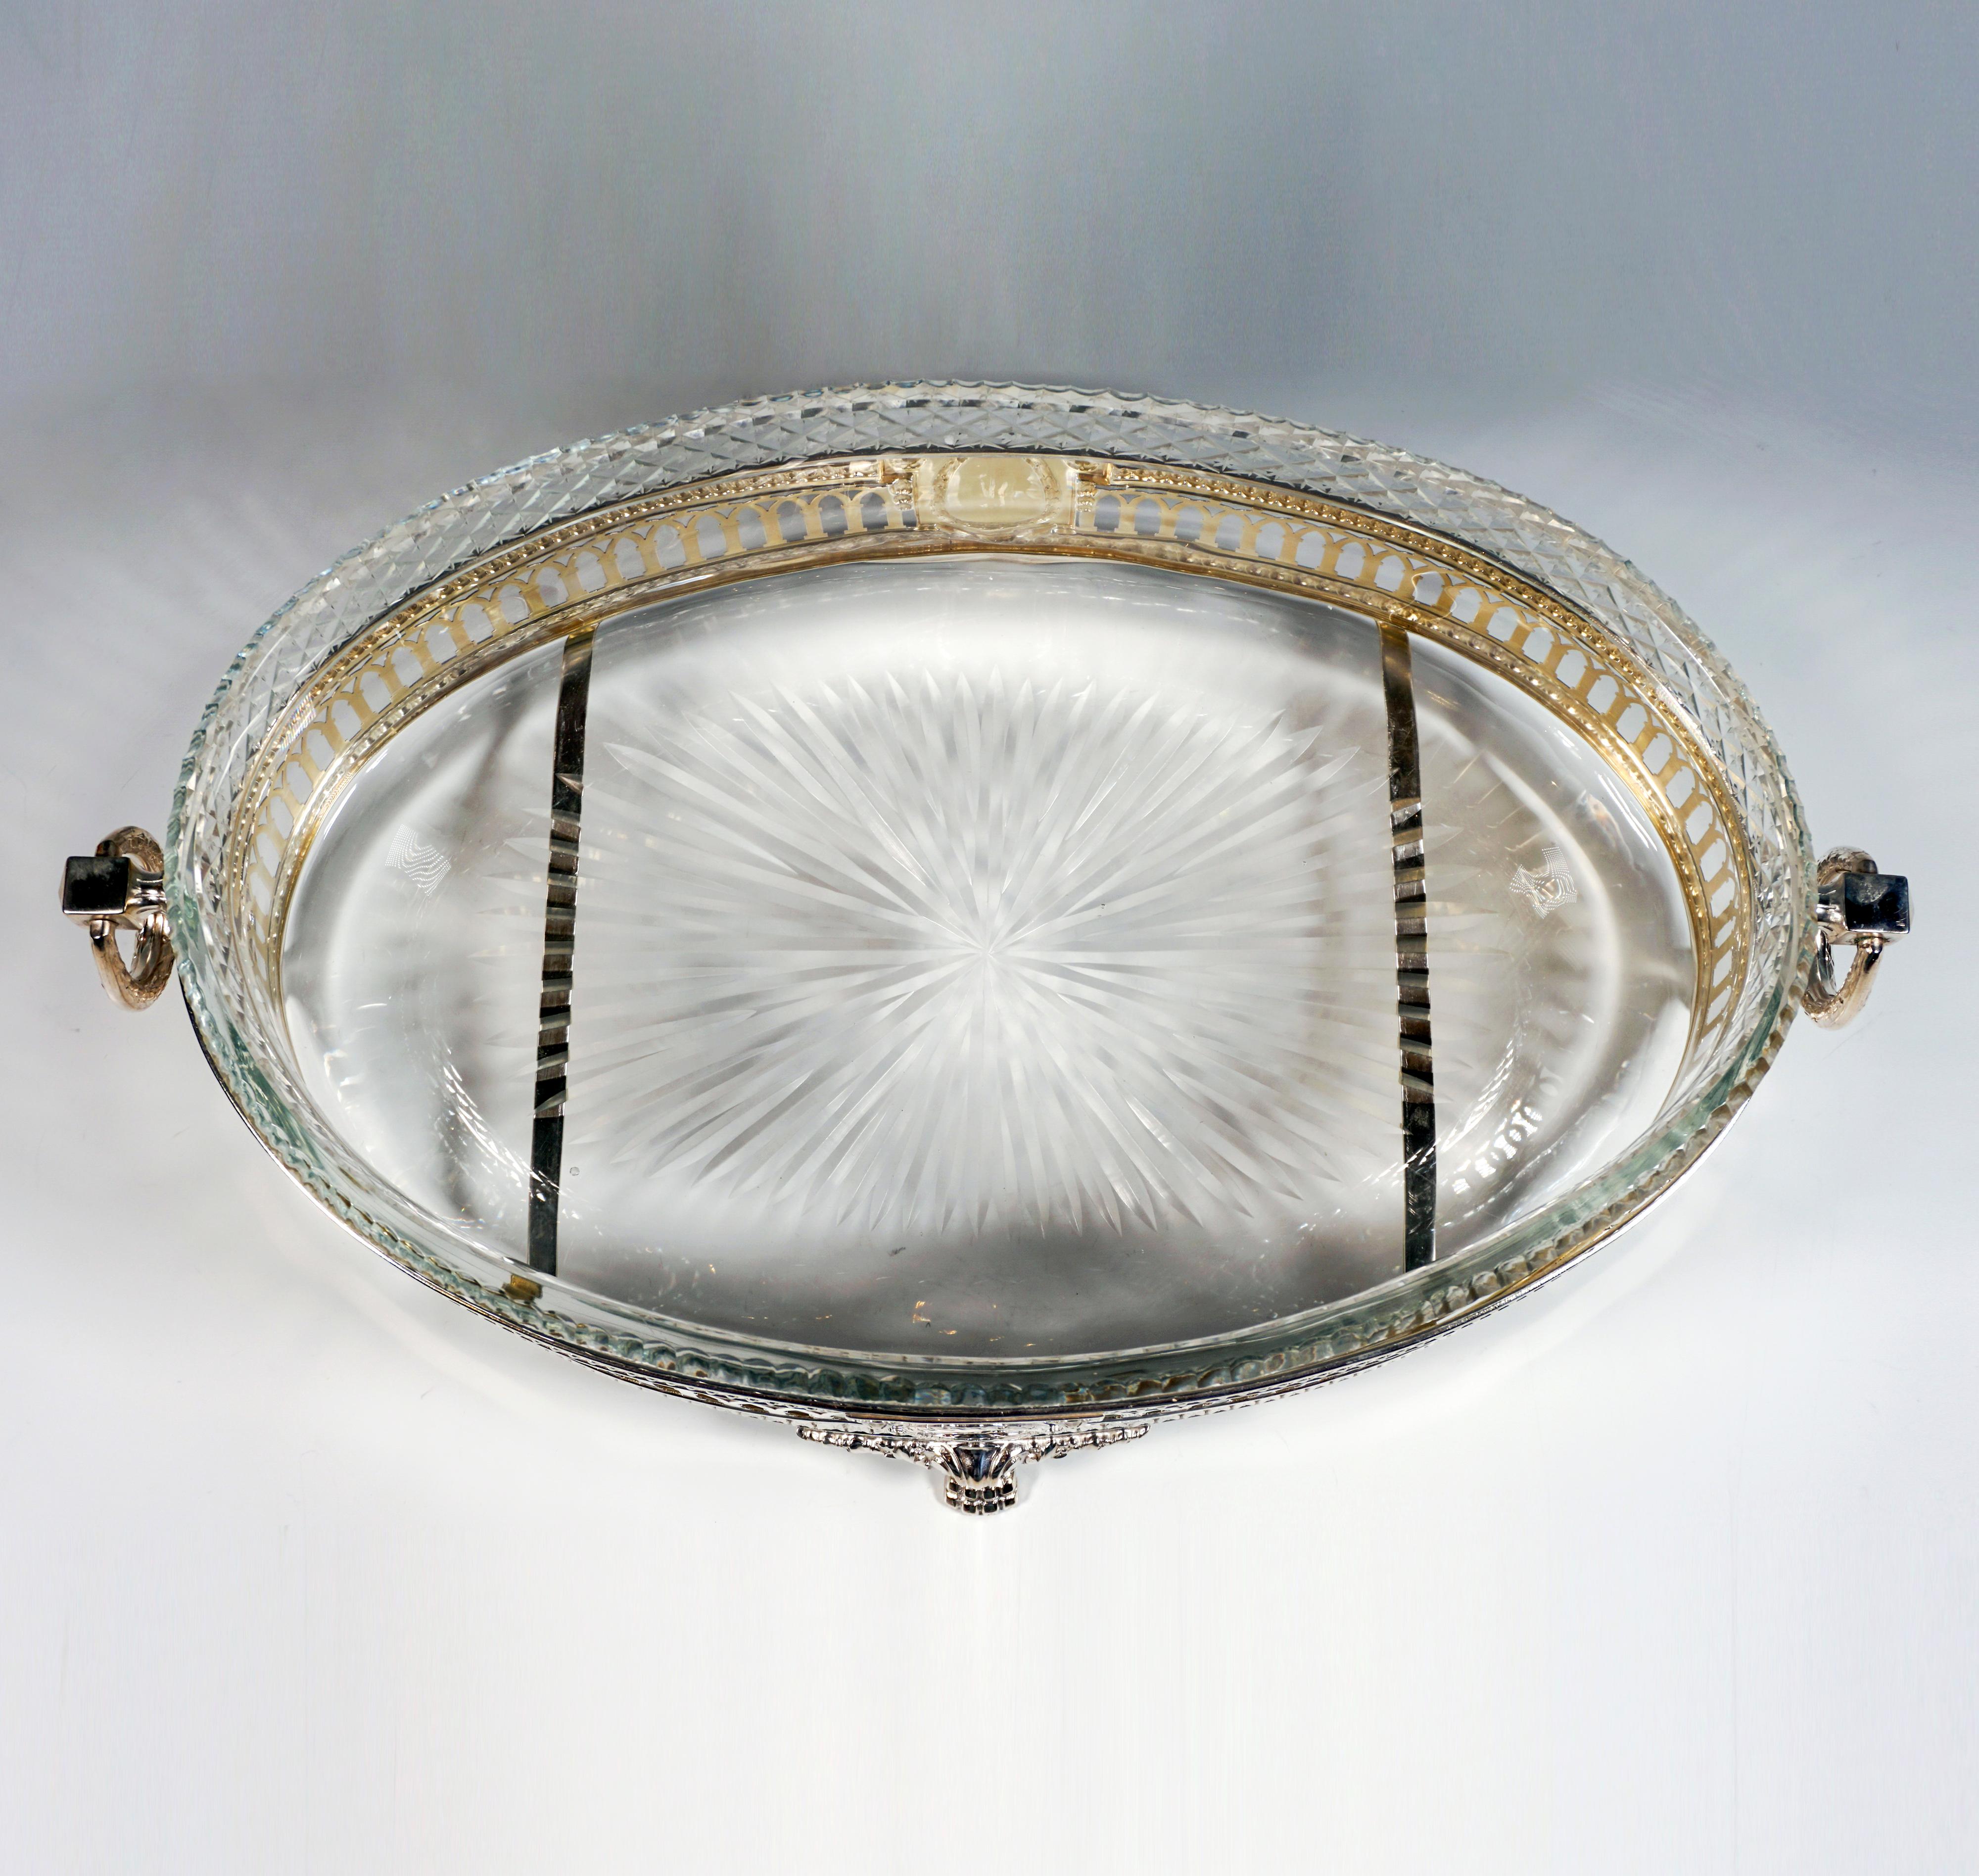 Art Nouveau Silver Jardinière With Cut Glass Liner, Wilhelm Binder Germany c1900 In Good Condition For Sale In Vienna, AT